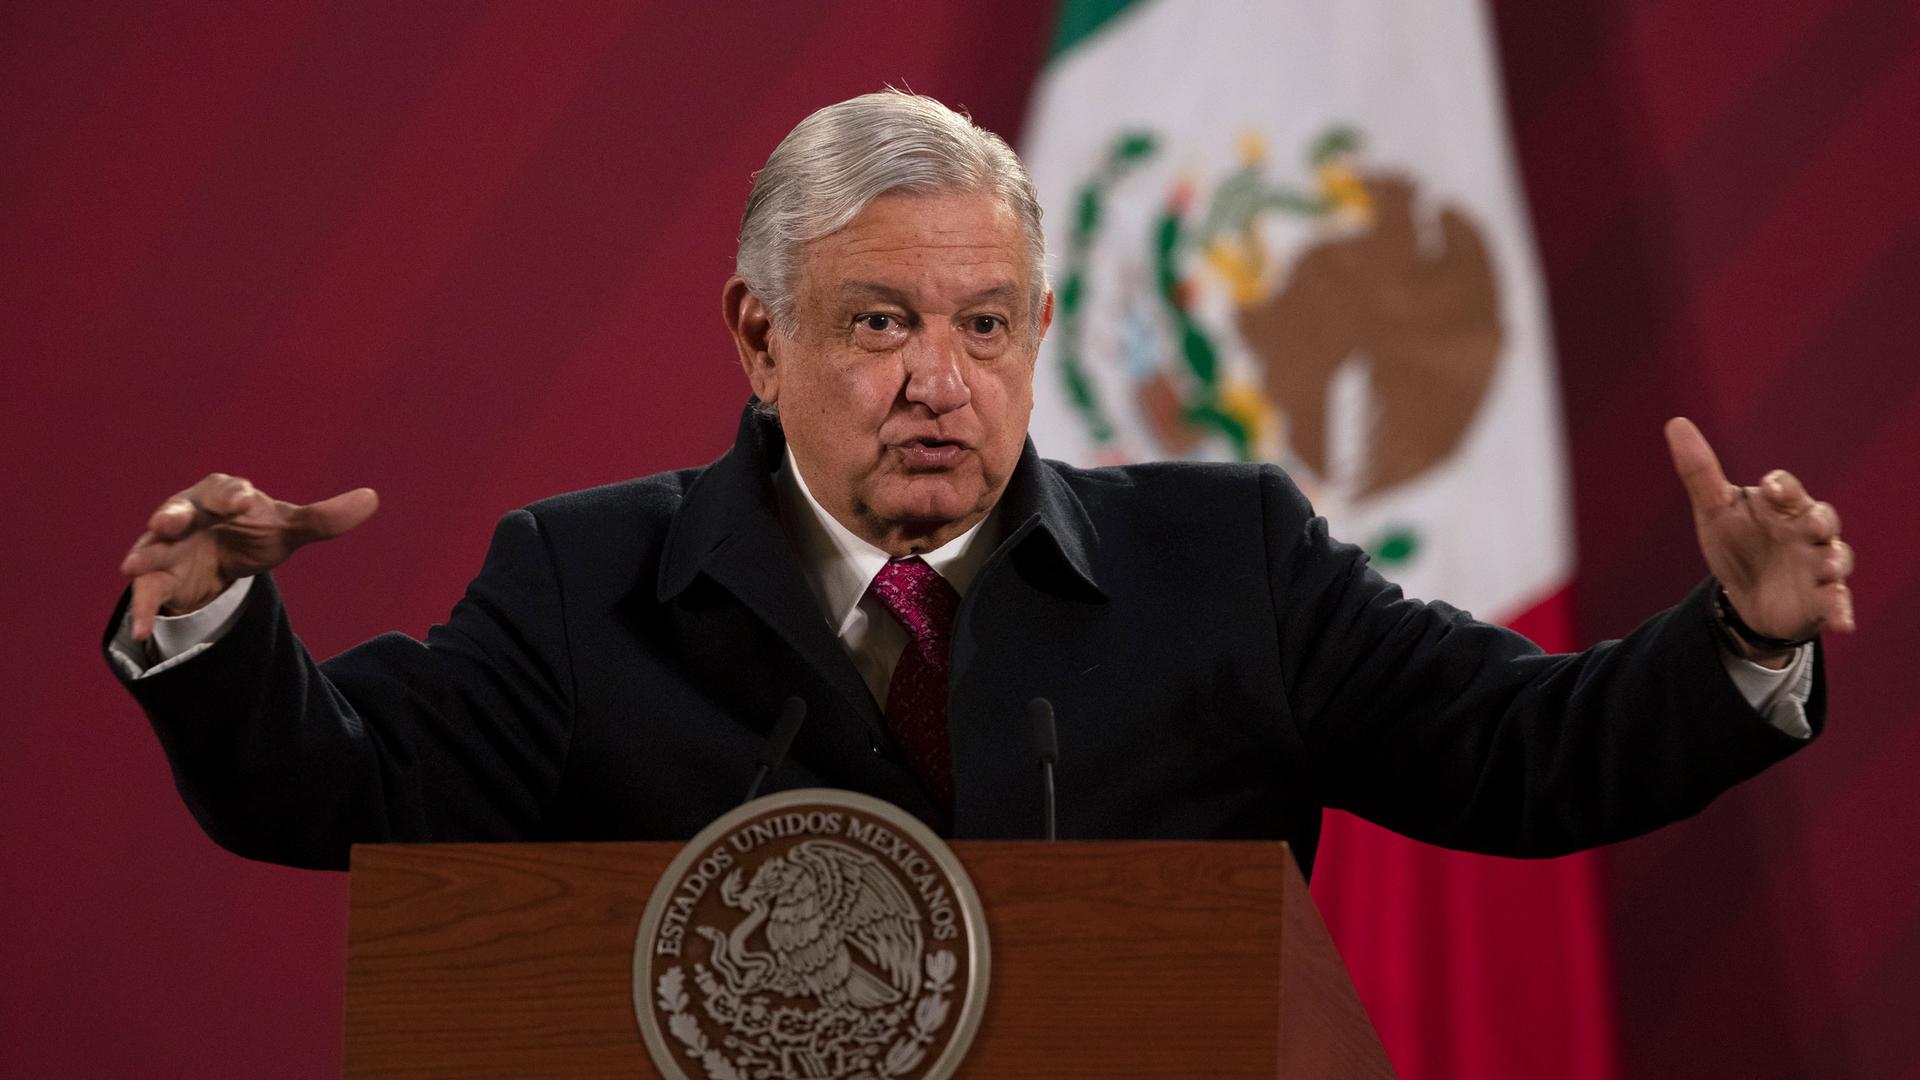 Mexican President Andrés Manuel López Obrador is shown speaking while standing behind a podium with his arms outstretched.